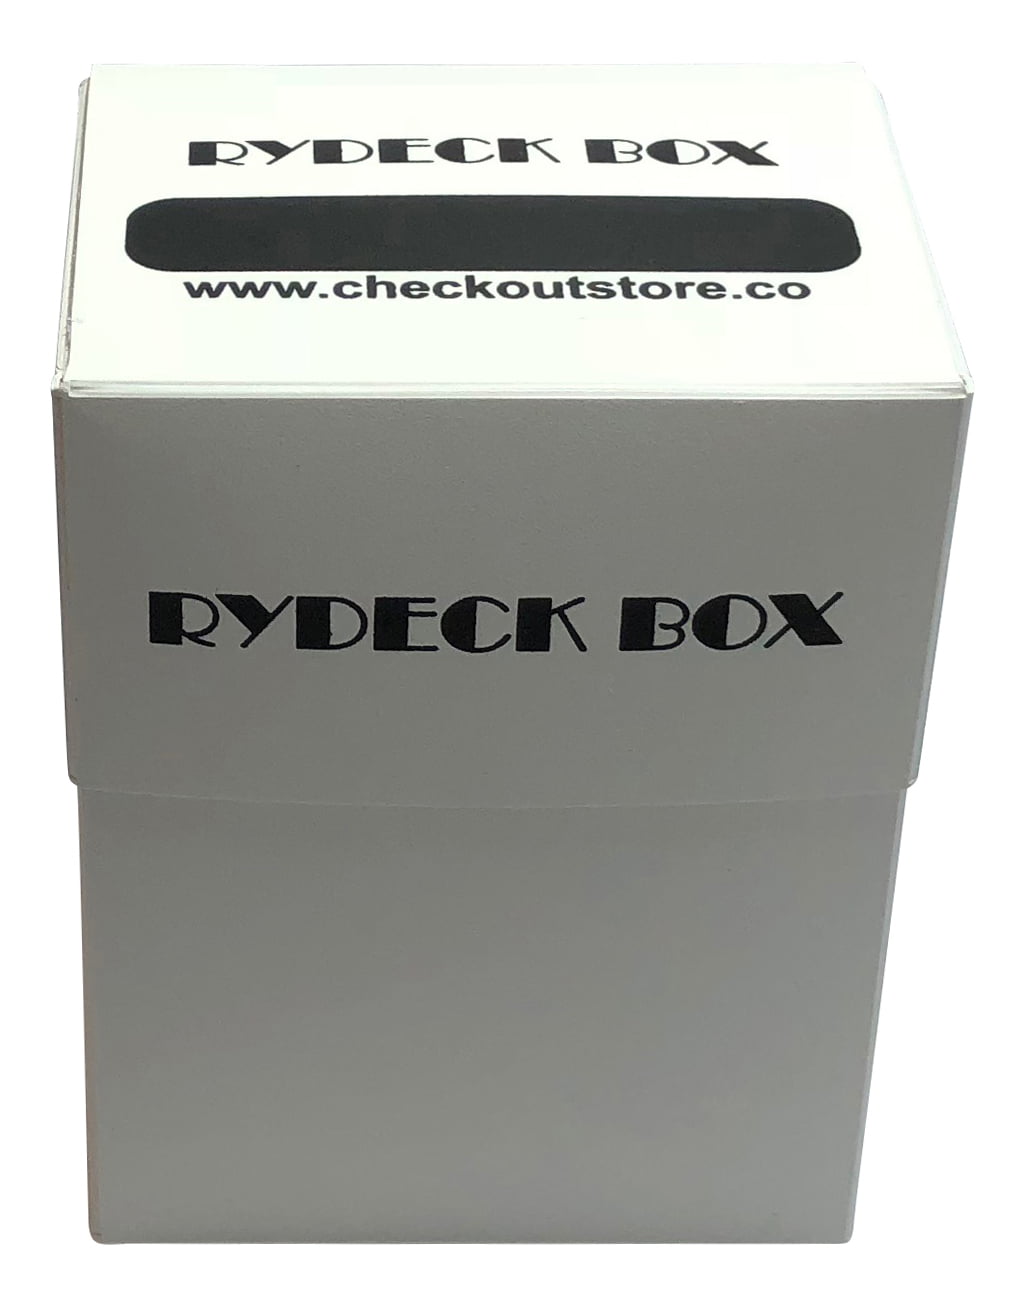 Blue CheckOutStore 1 Rydeck Box 120 Trading Card Holder